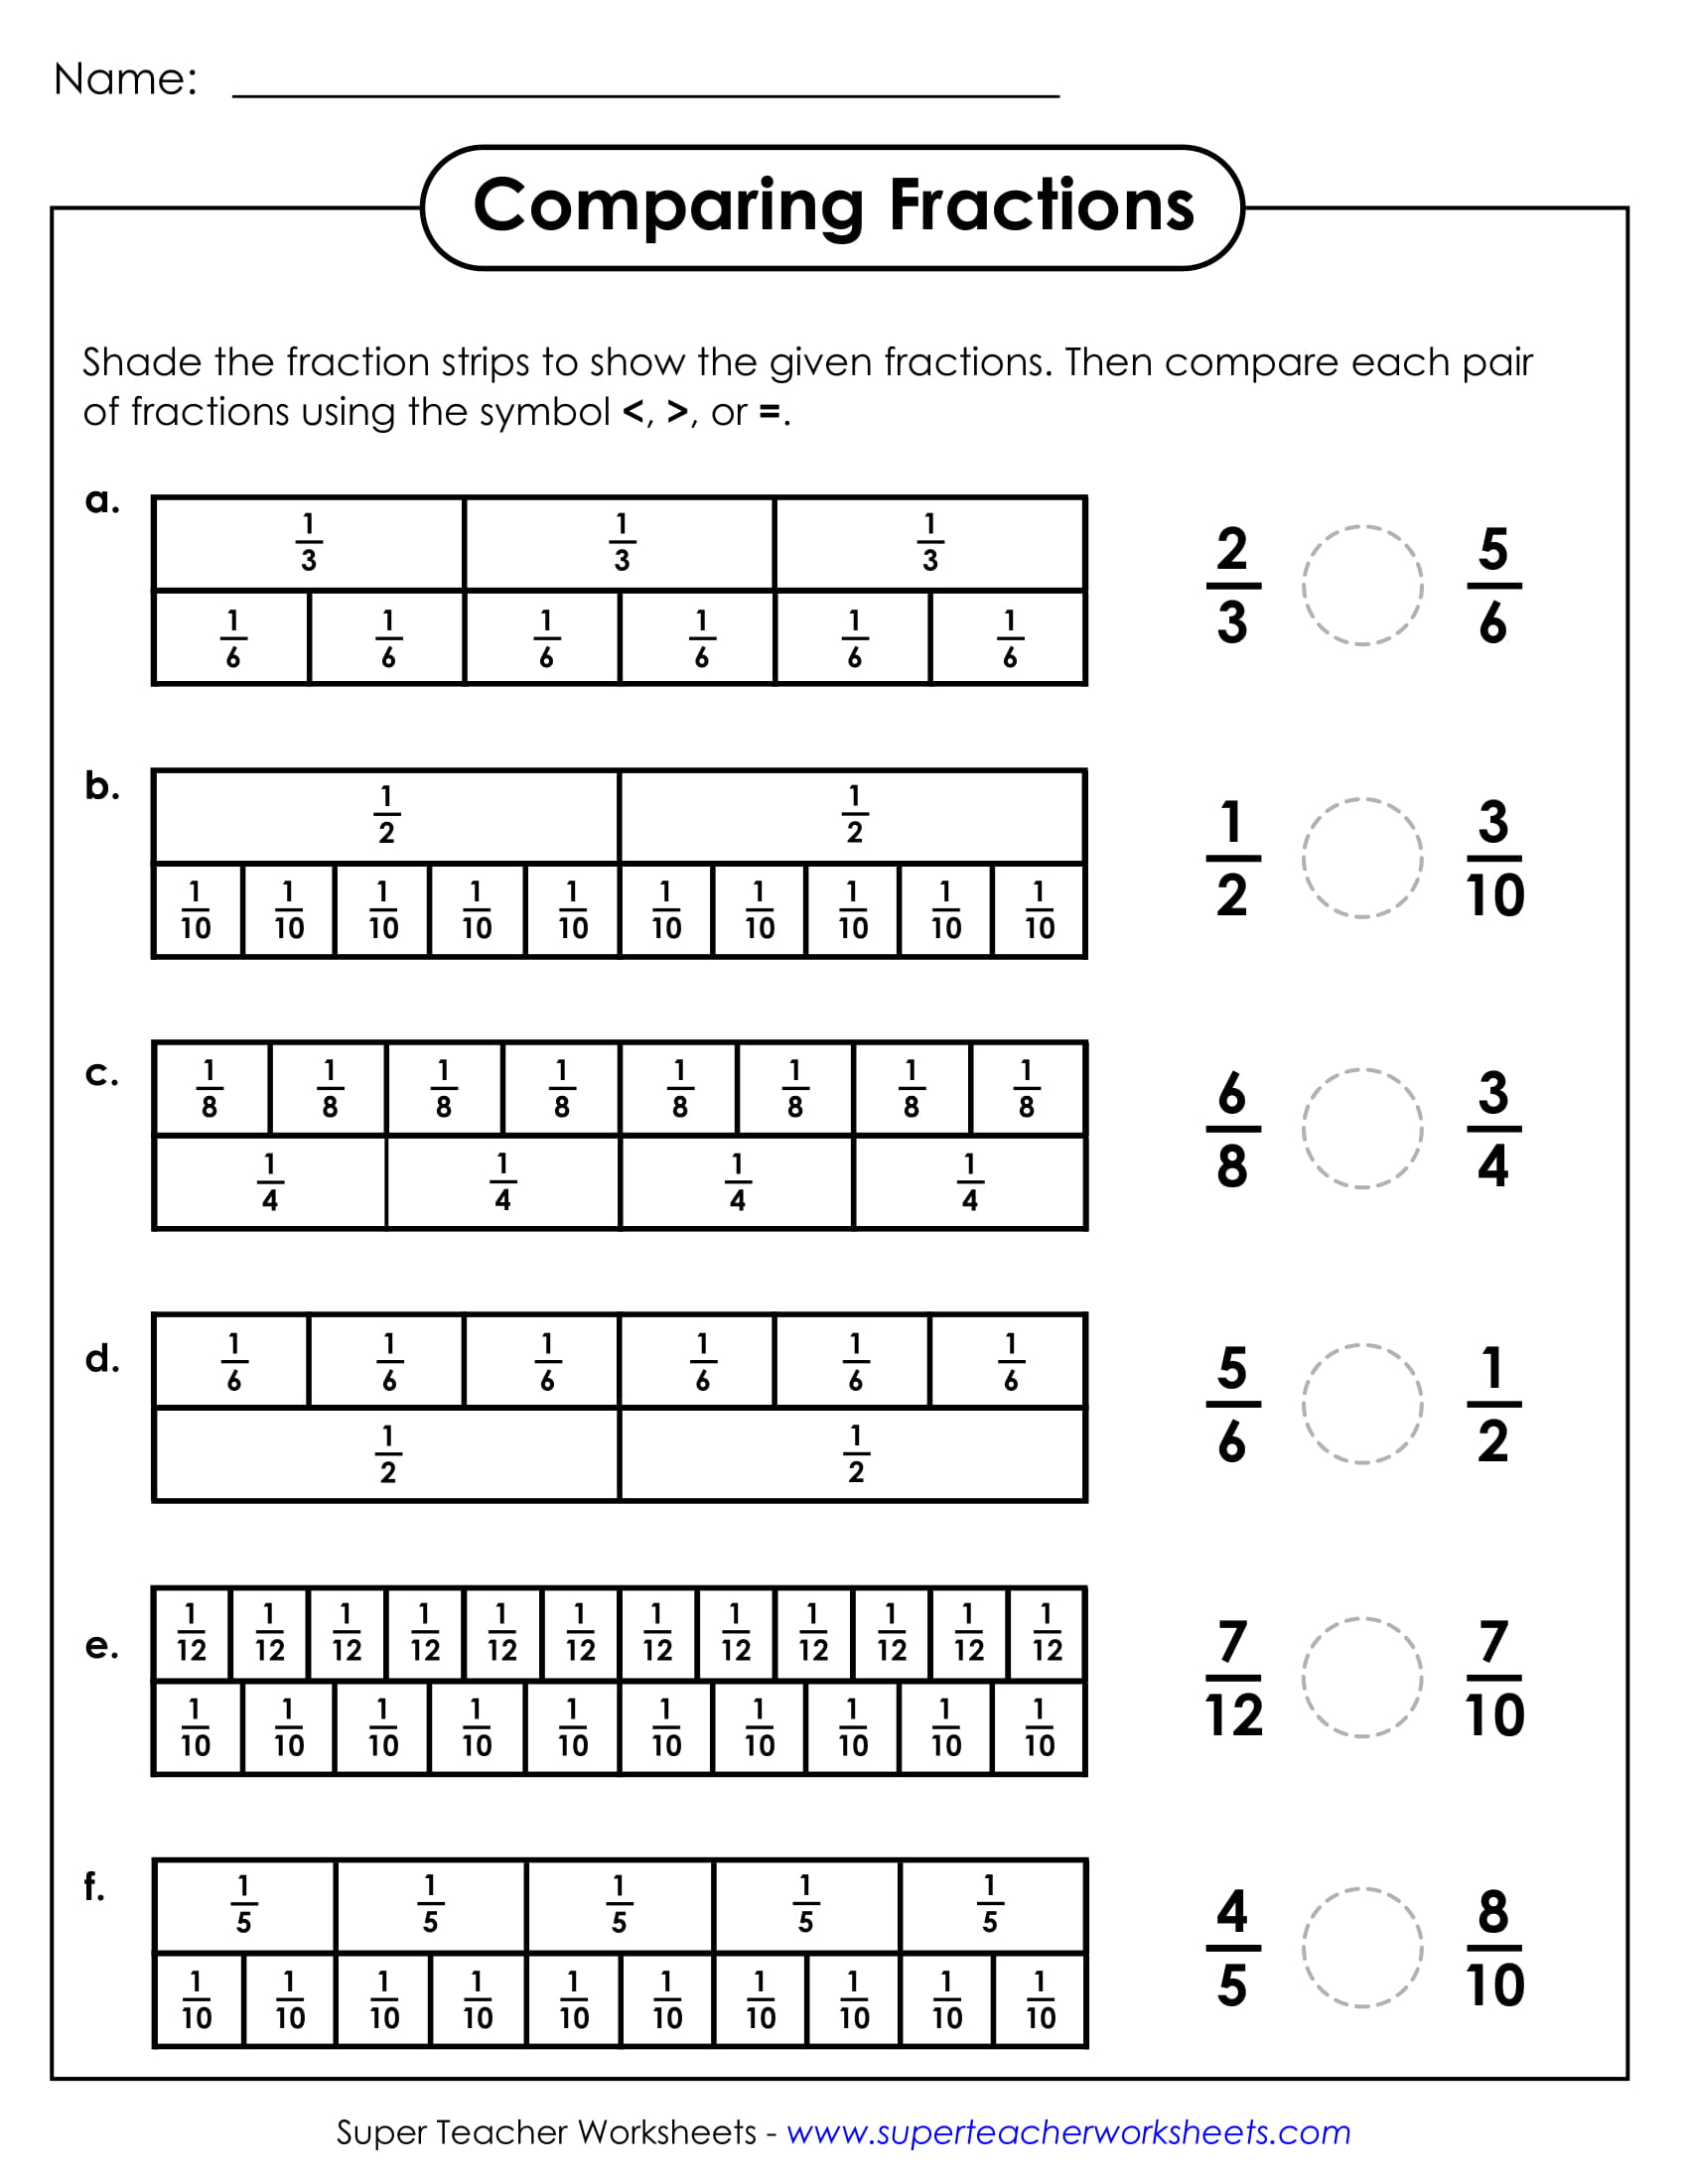 25+ Fraction Worksheets Examples - PDF  Examples Intended For Equivalent Fractions Worksheet Pdf